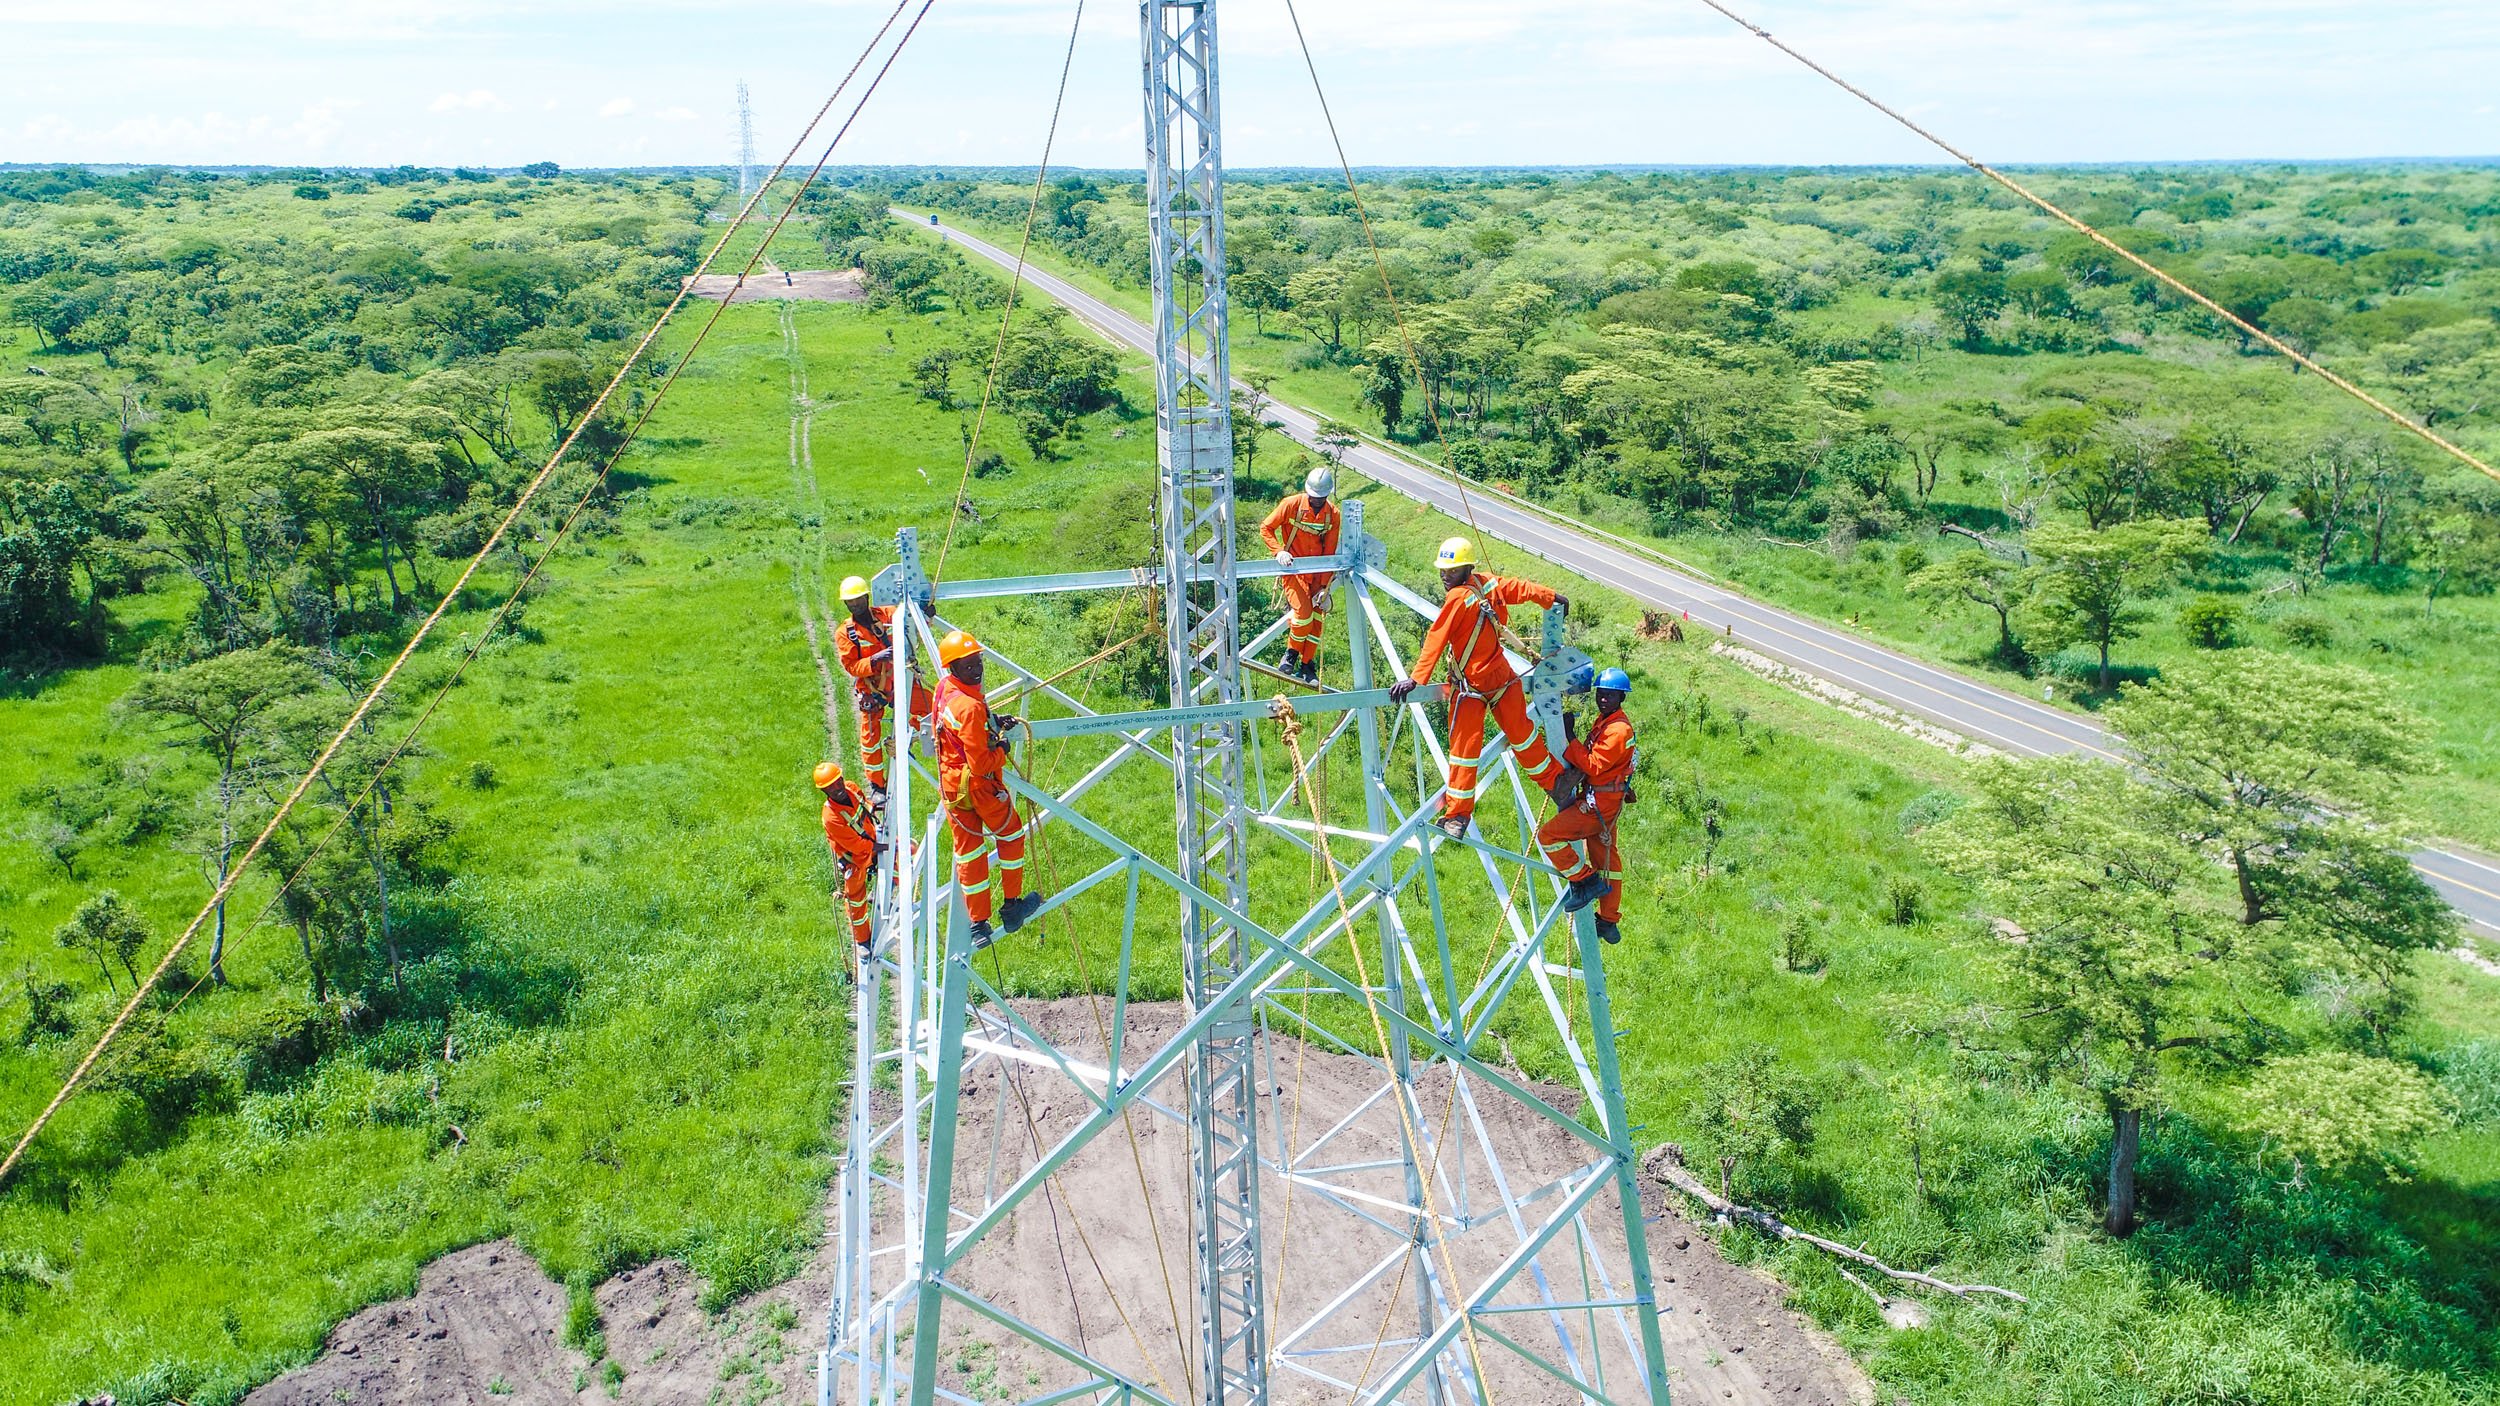 High voltage power lines under construction to evacuate power from Karuma